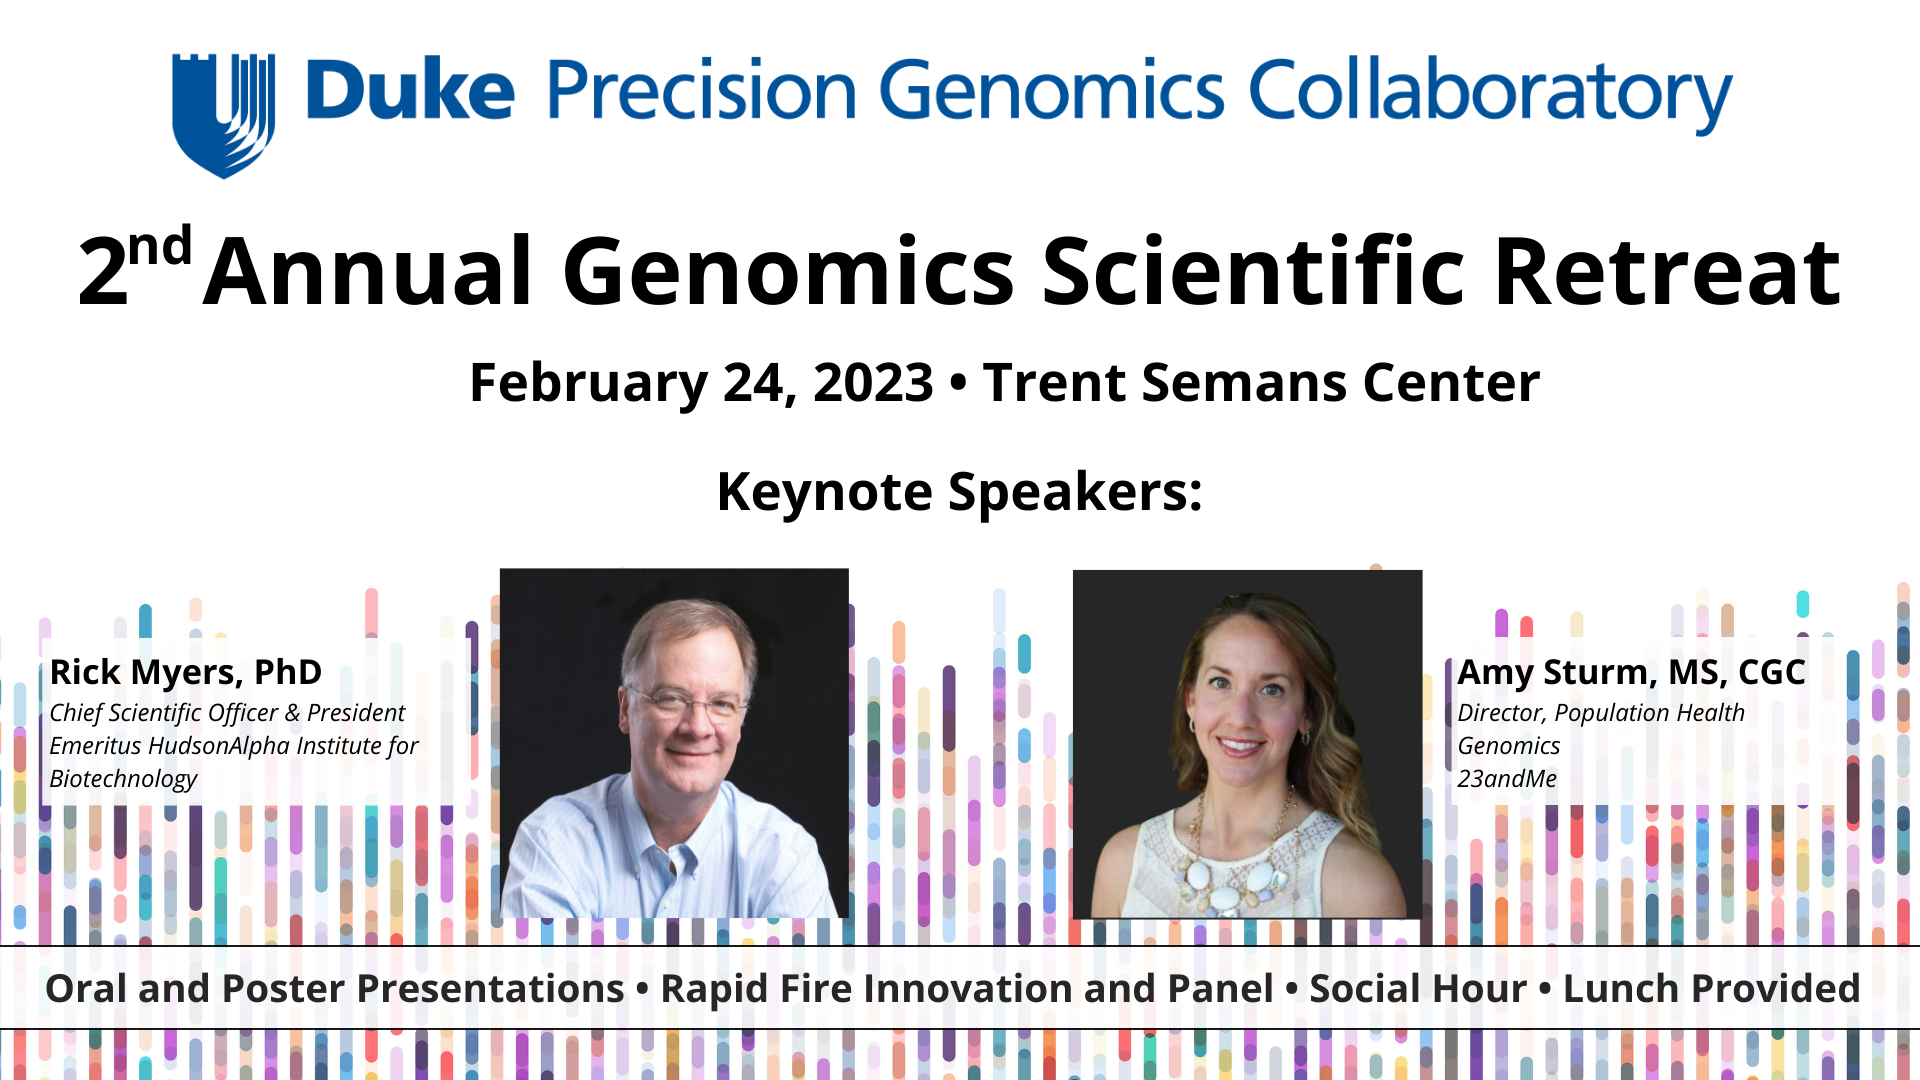 Duke Precision Genomics Collaboratory second annual genomics scientific retreat, february 24, 2023, trent semans center. Keynote speakers: Rick Myers, PhD  Chief Scientific Officer and President Emeritus HudsonAlpha Institute for Biotechnology and Amy Sturm, Director of population health genomics for 23andMe 